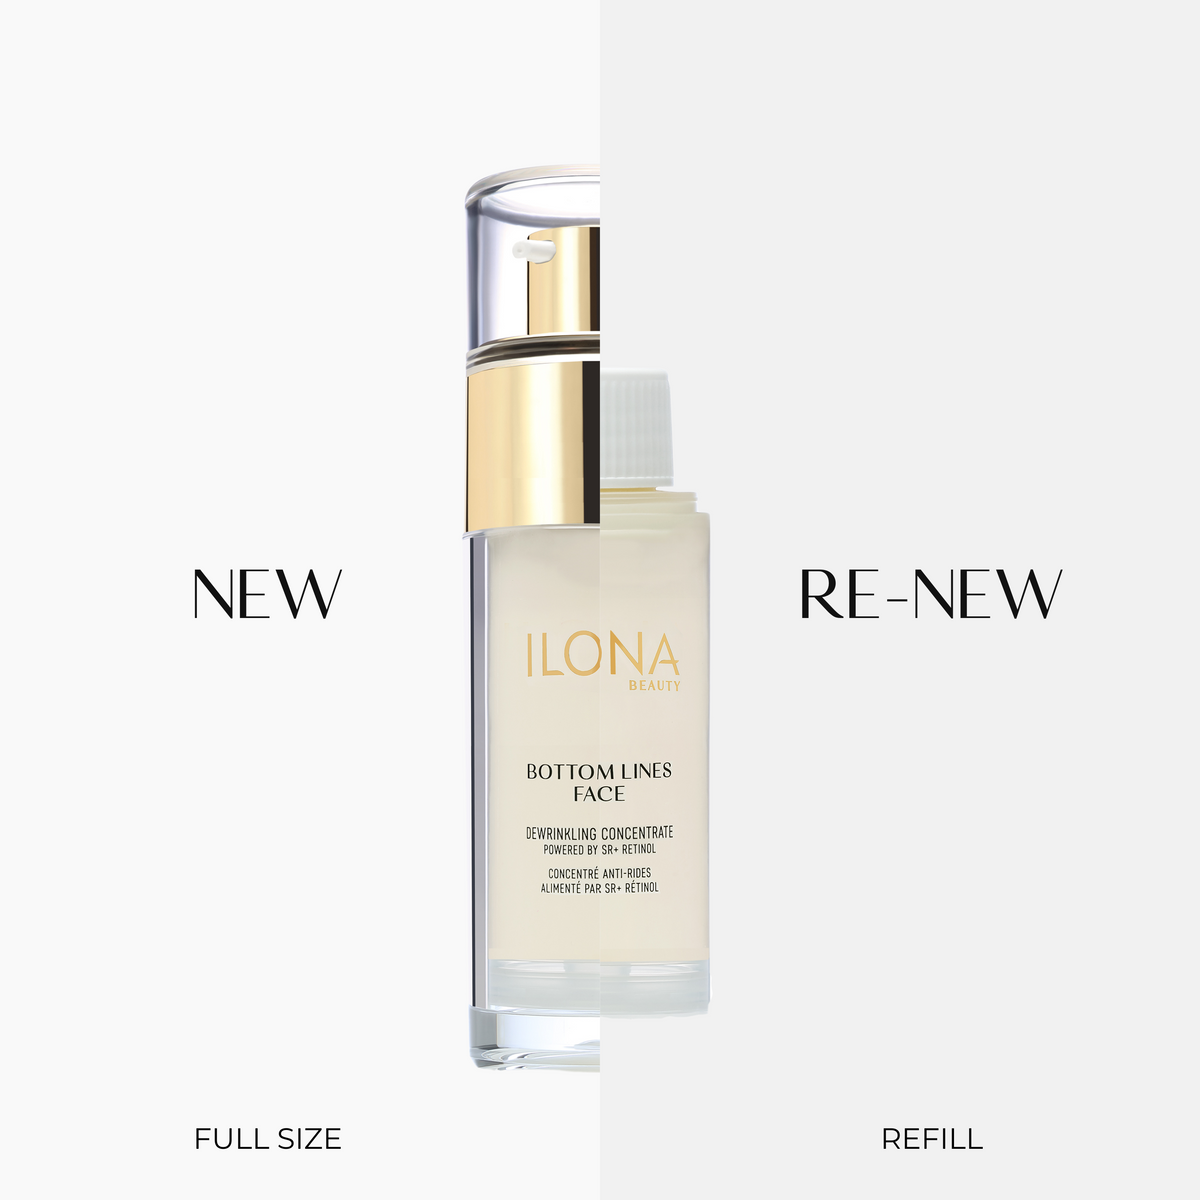 Bottom Lines Face Refill Dewrinkling Concentrate [Powered by SR+ Retinol]